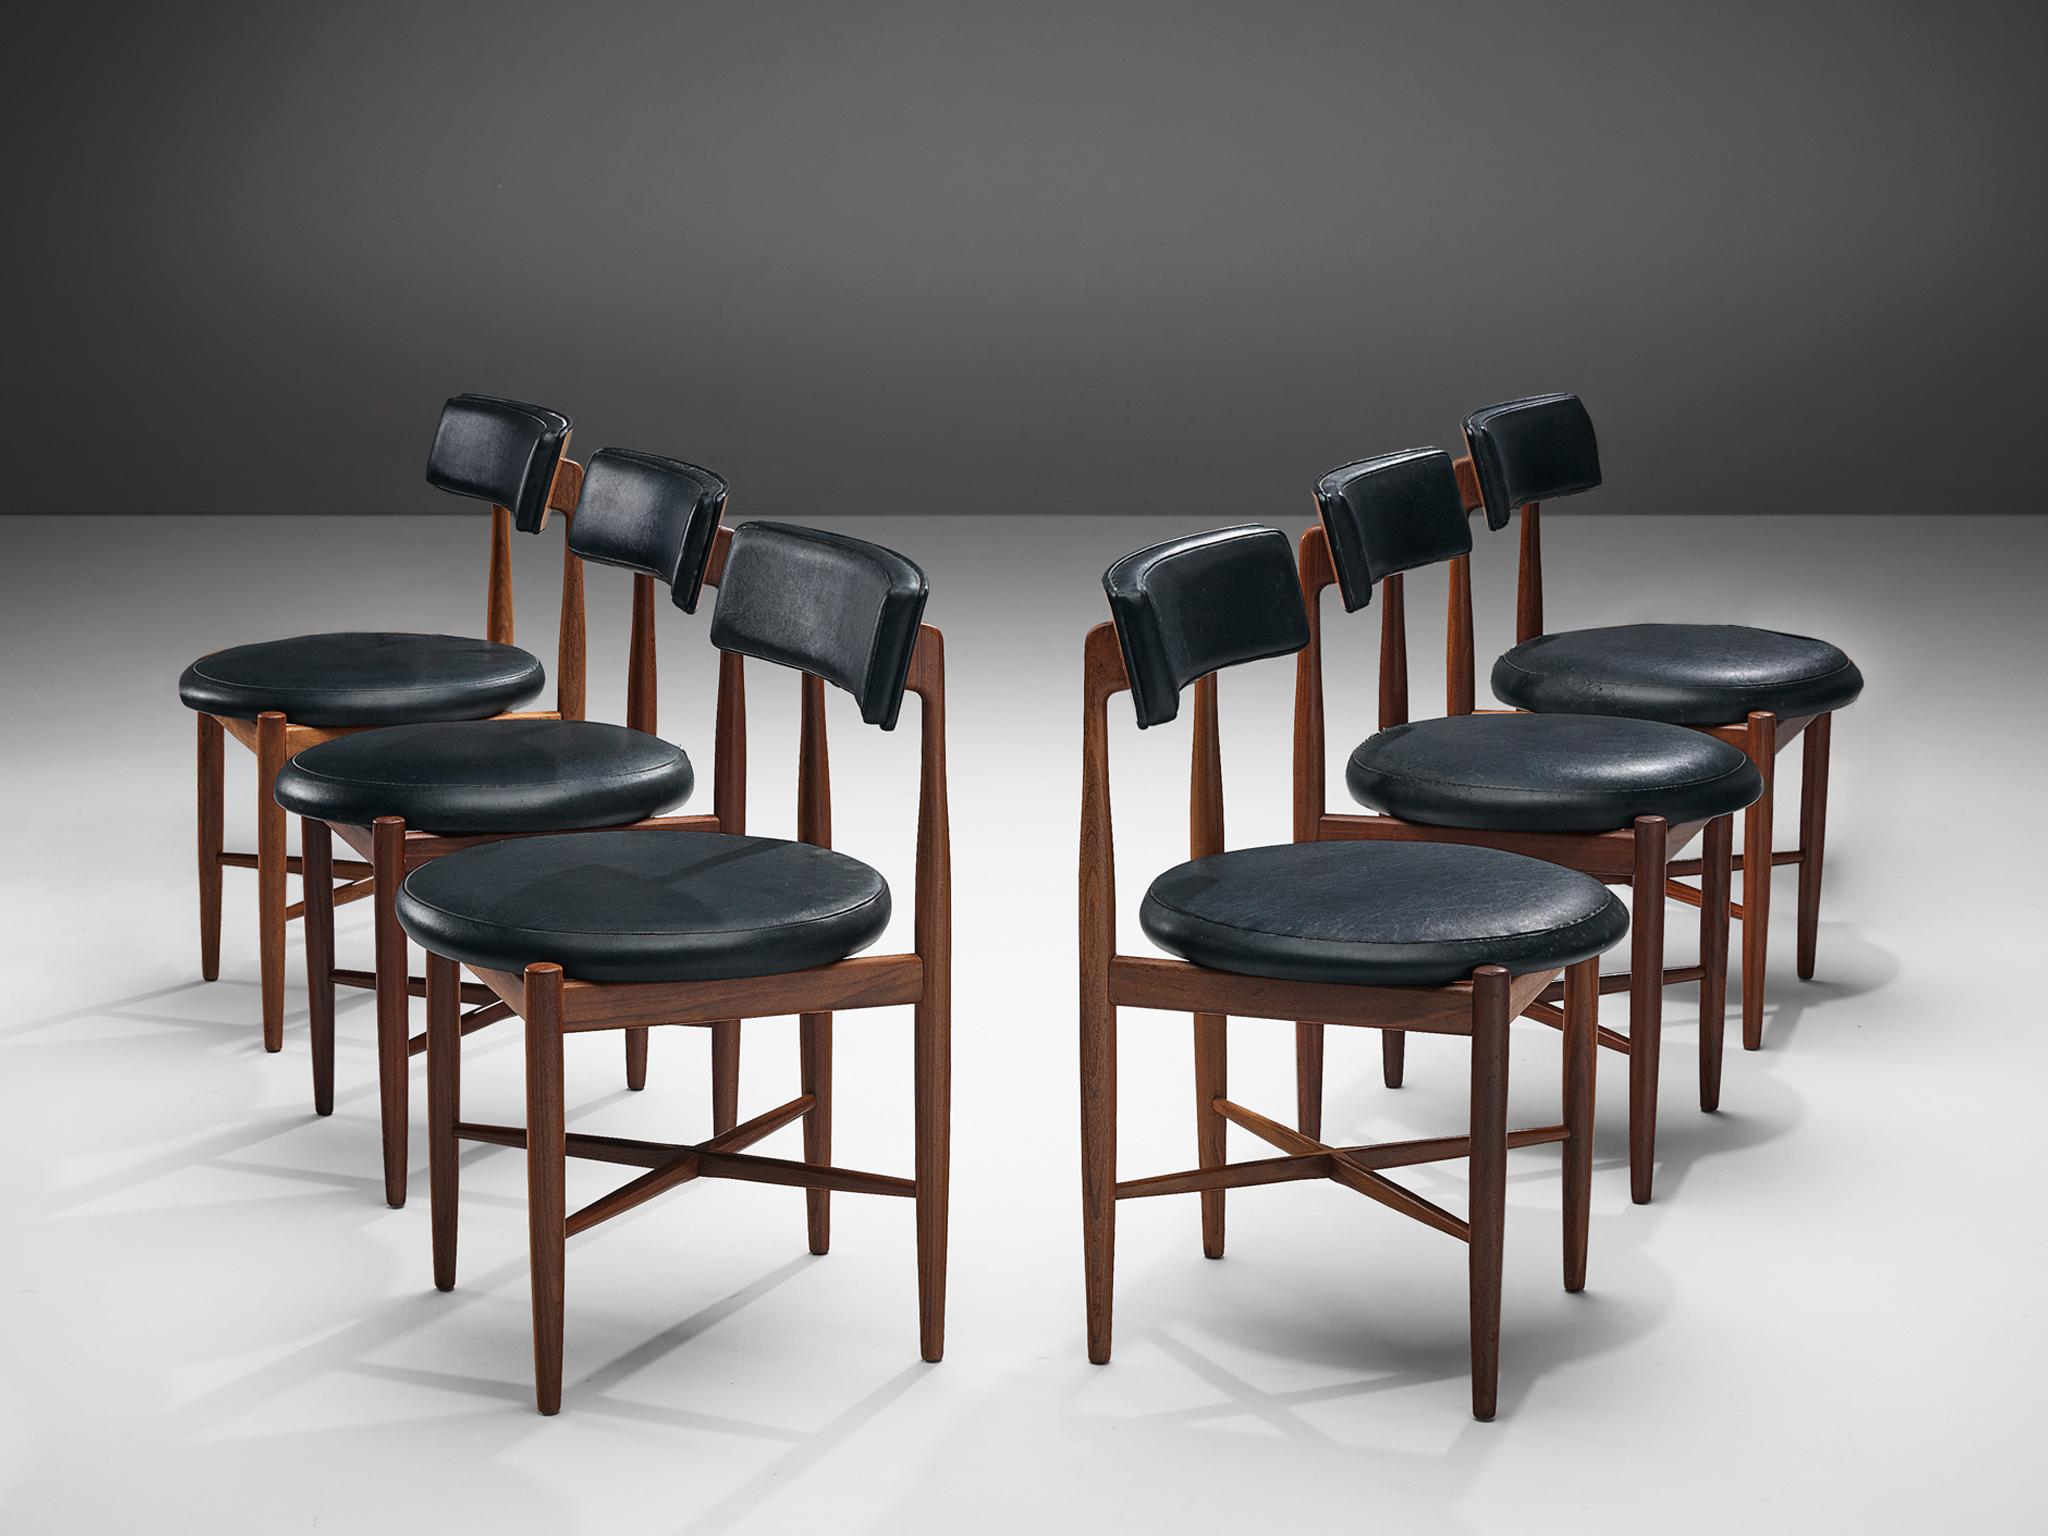 Victor Bramwell Wilkins for G Plan, set of six dining chairs, model 'Fresco', faux leather, teak, United Kingdom, 1967

Set of eight dining chairs, designed by Victor Bramwell Wilkins for the British manufacturer G Plan in 1967. Wilkins designed the